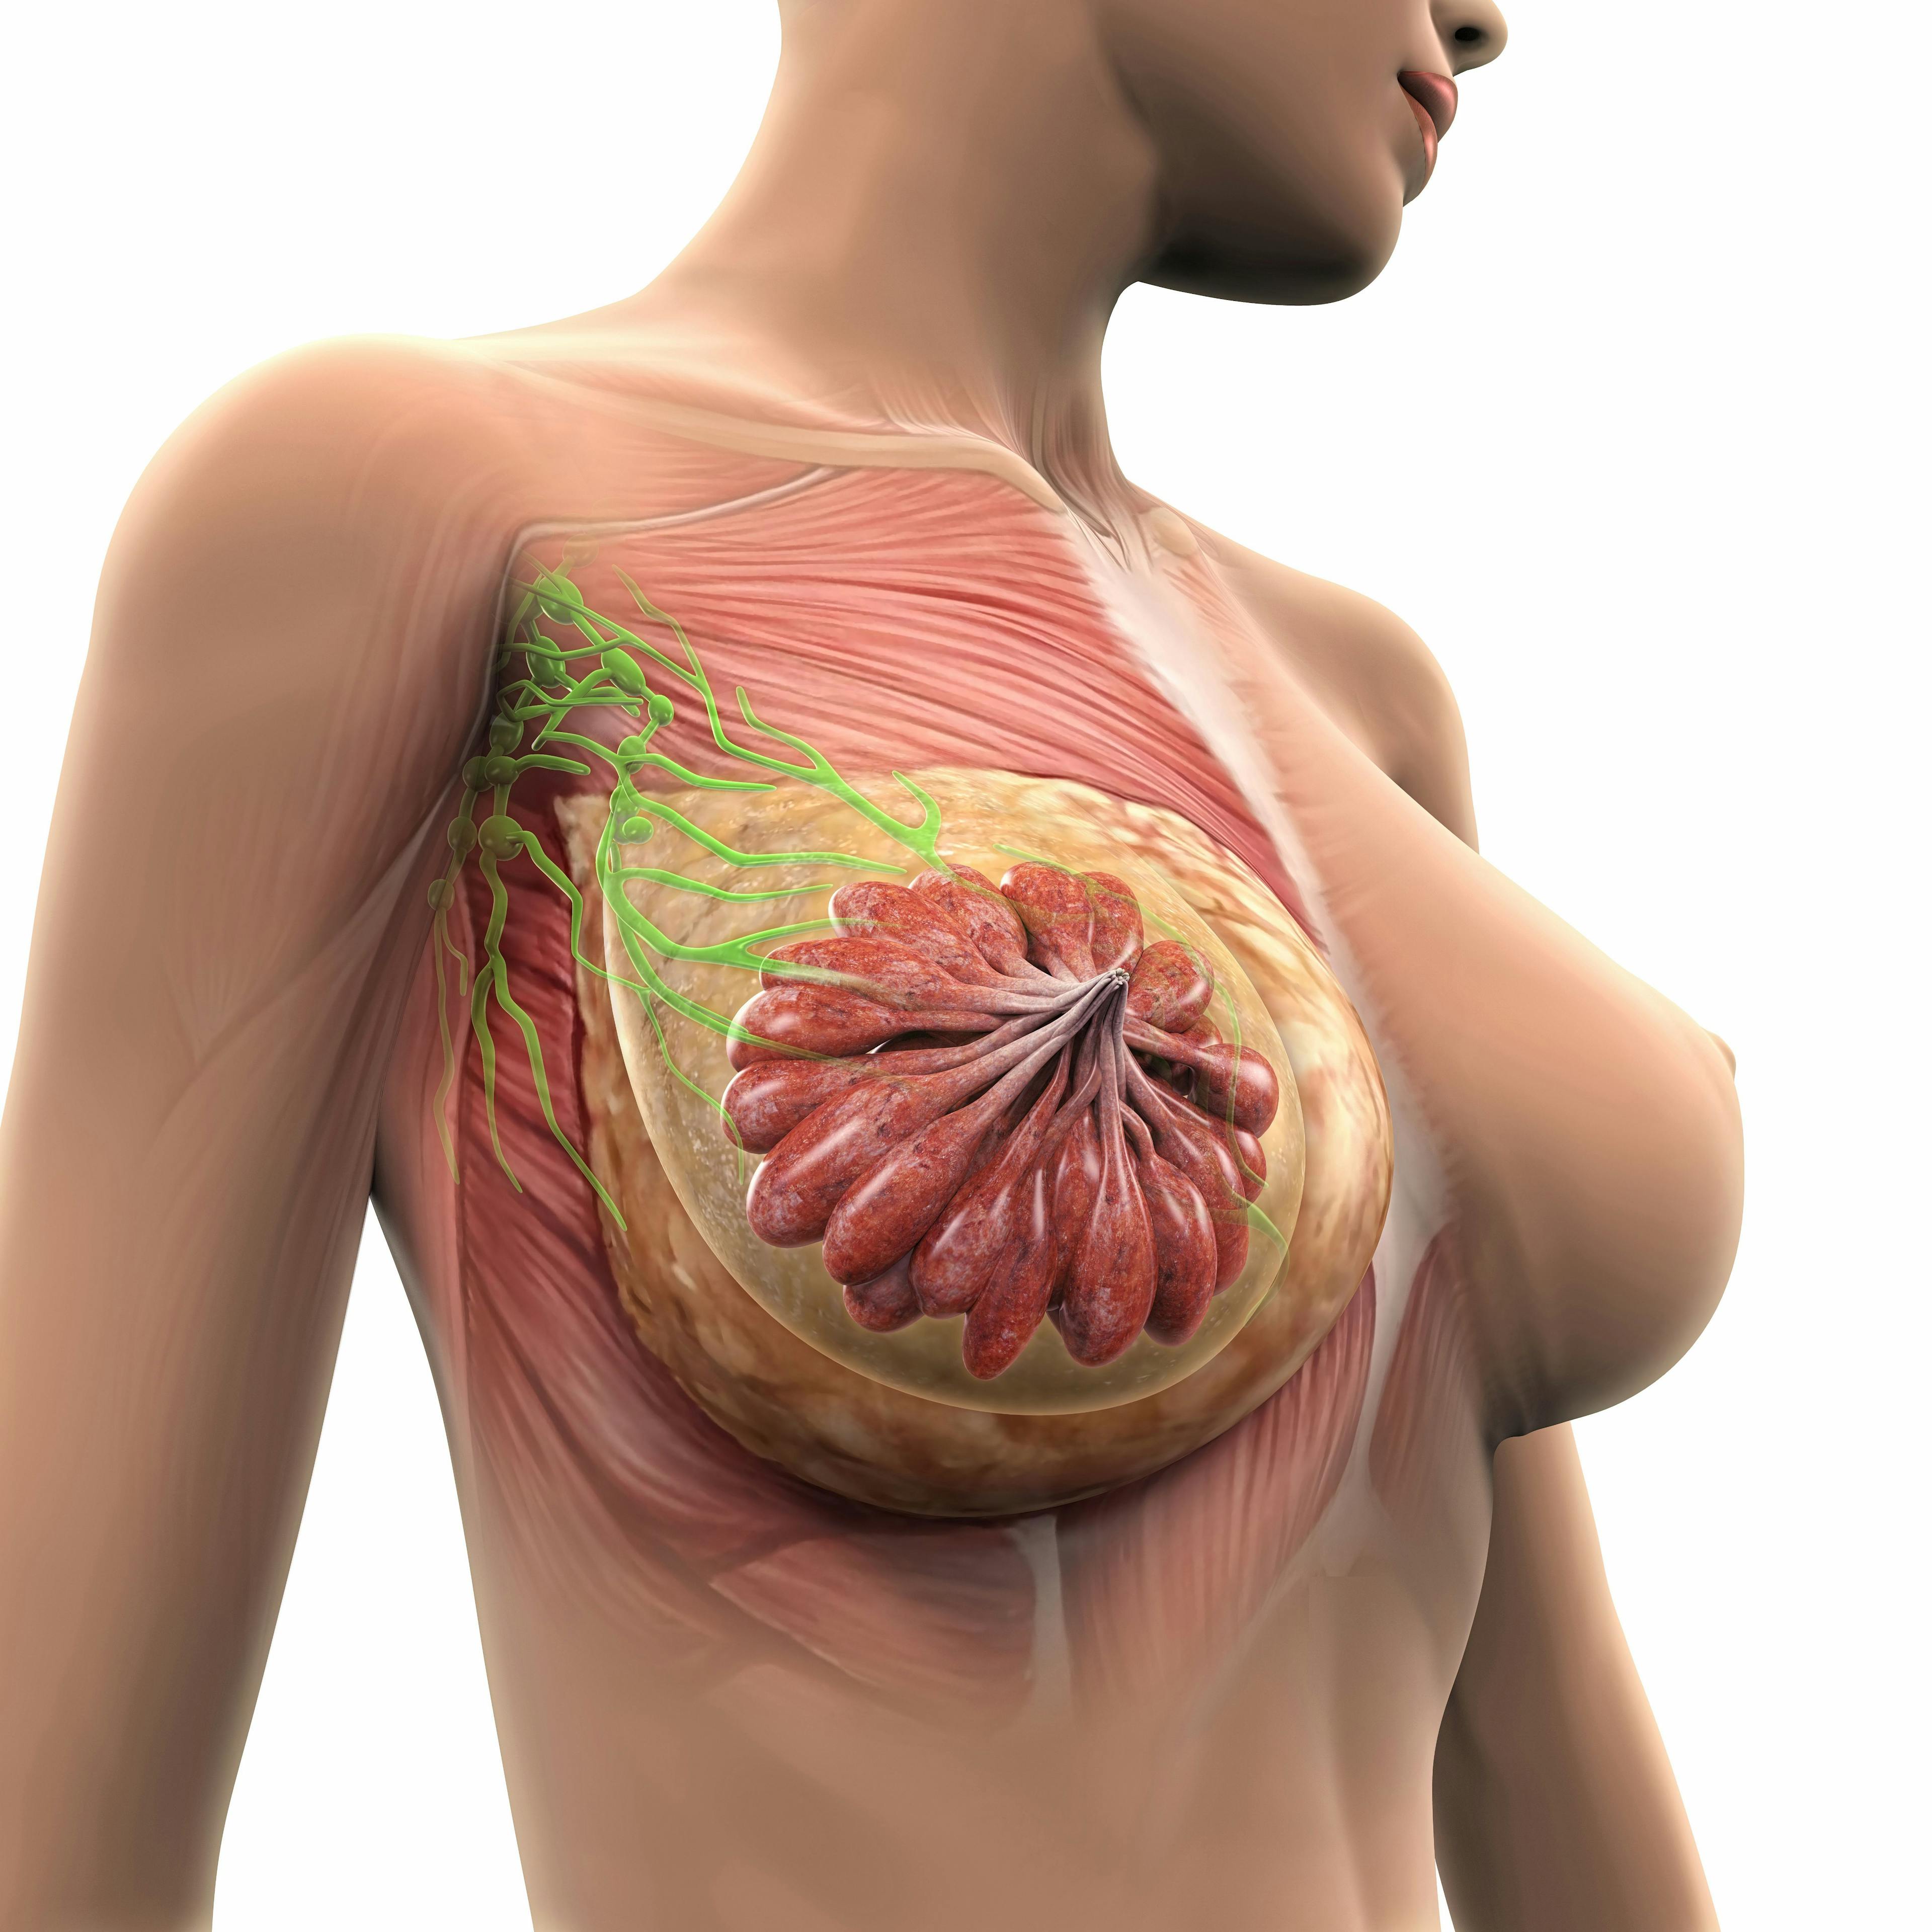 Neratinib Plus Fulvestrant Appears Active in ER+ HER2-Mutated Metastatic Breast Cancer